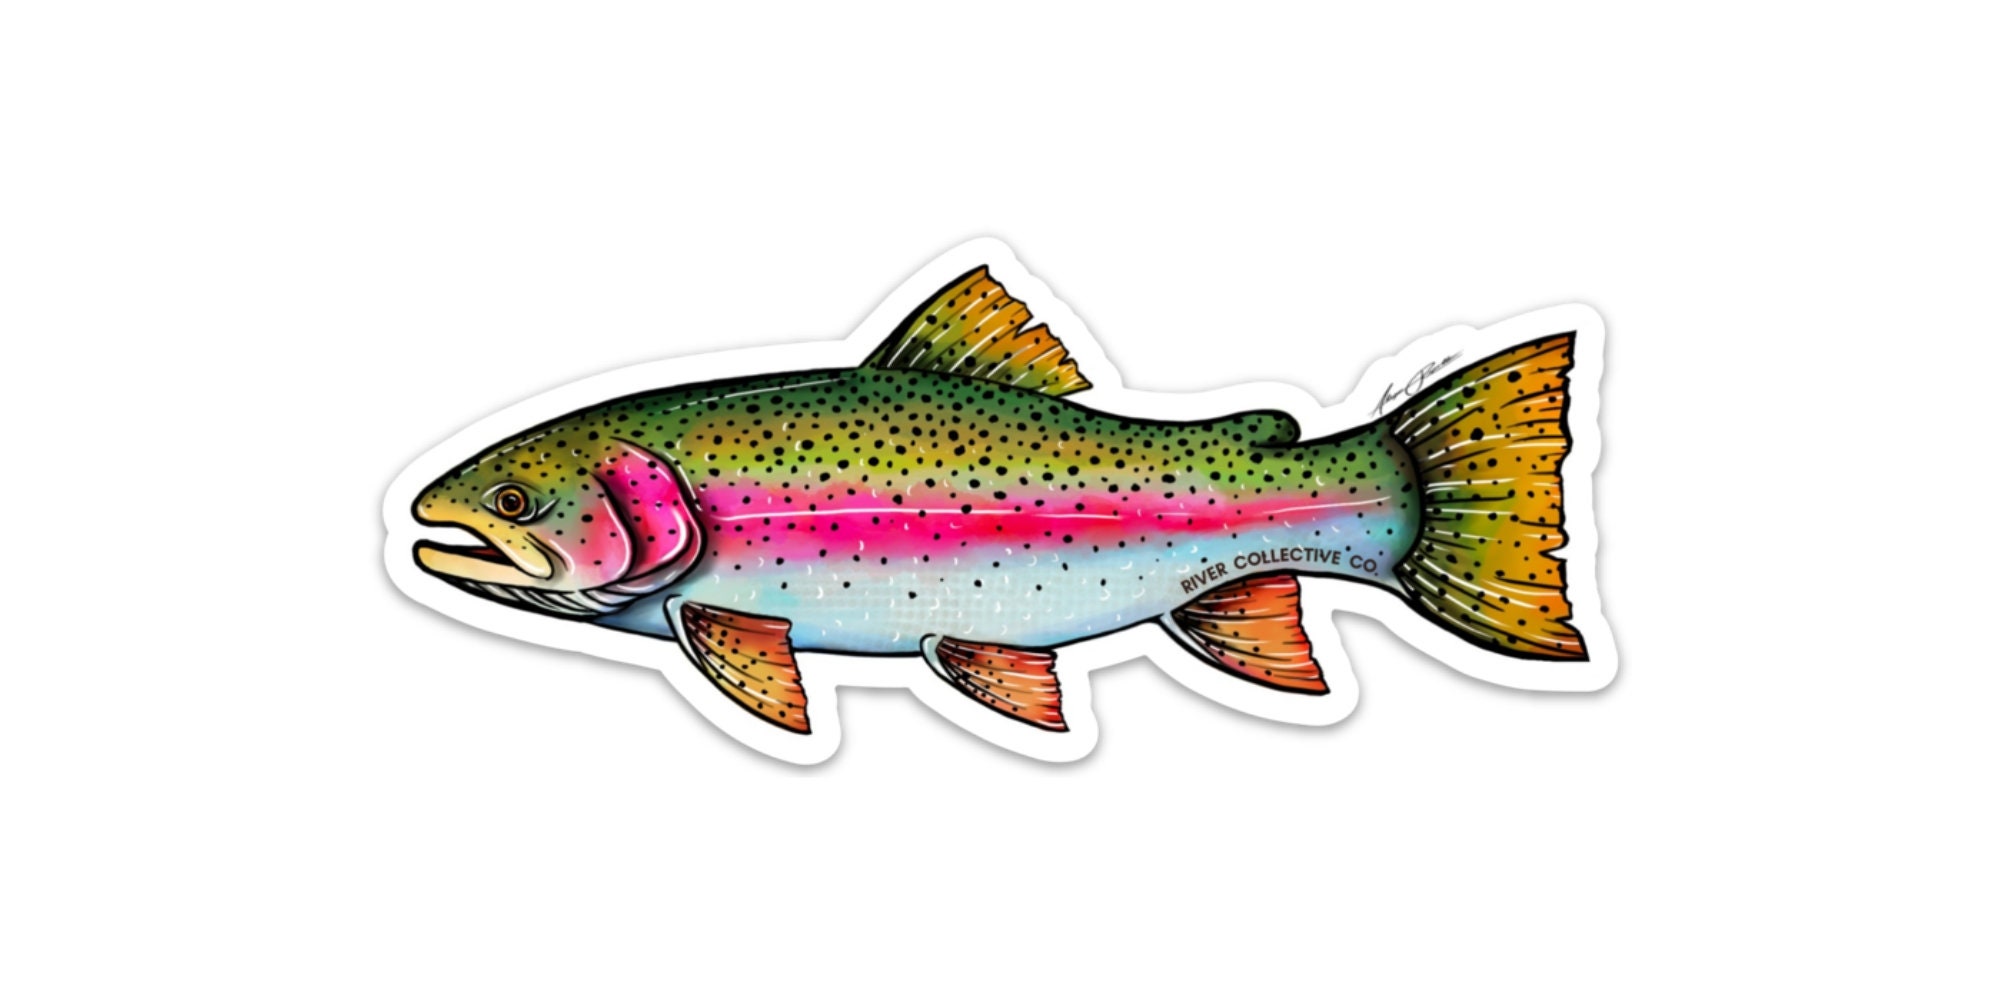  50Pcs Bass Fishing Decals Fishing Trout Decals Jumping Trout  Fish Auto Decal Car Truck Boat RV Real Life Rod Tackle Box